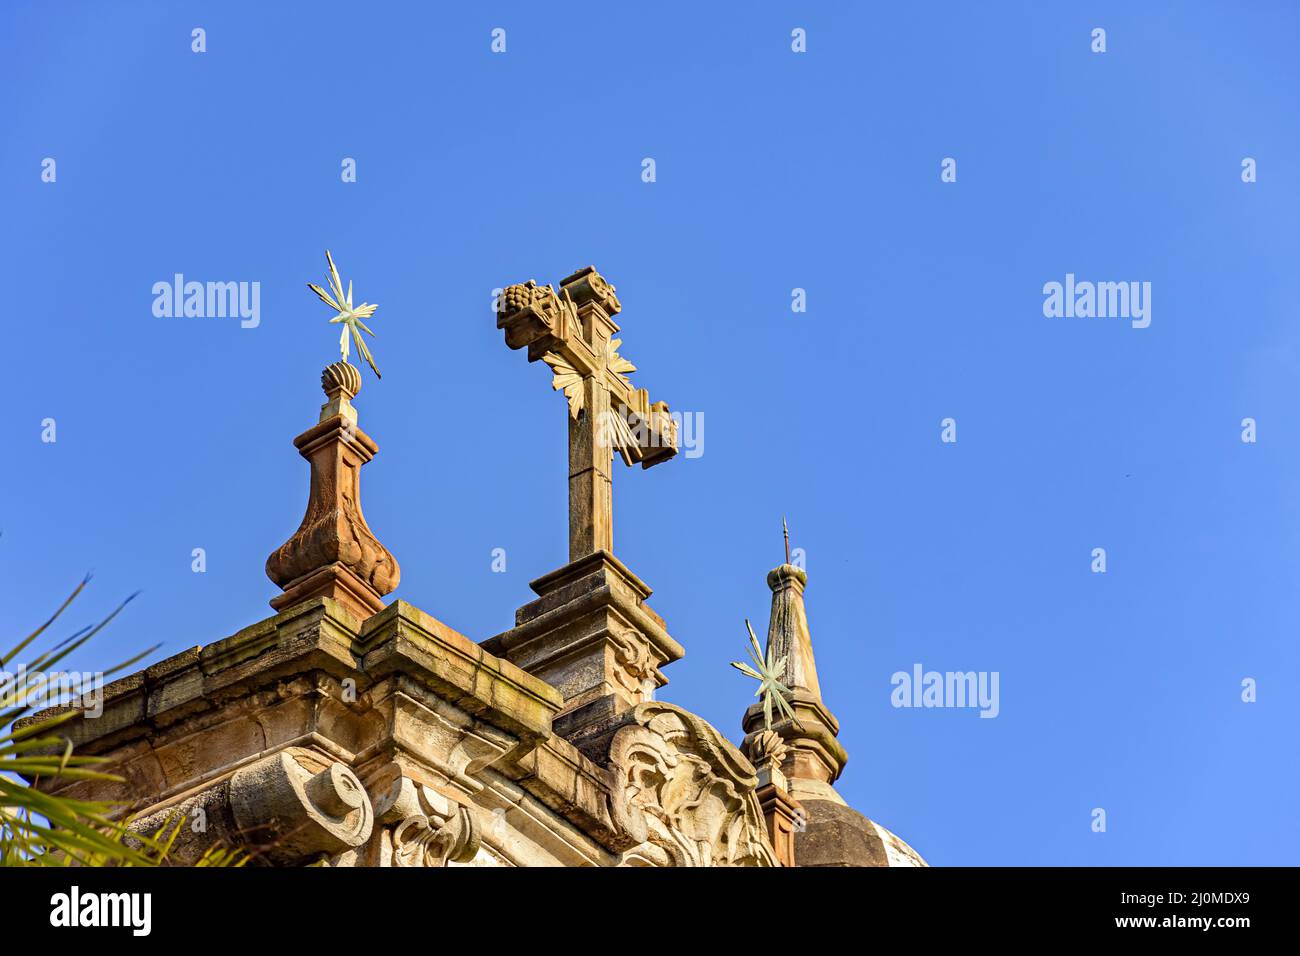 Crucifix and ornaments on top of the facade of an old and historic baroque church Stock Photo